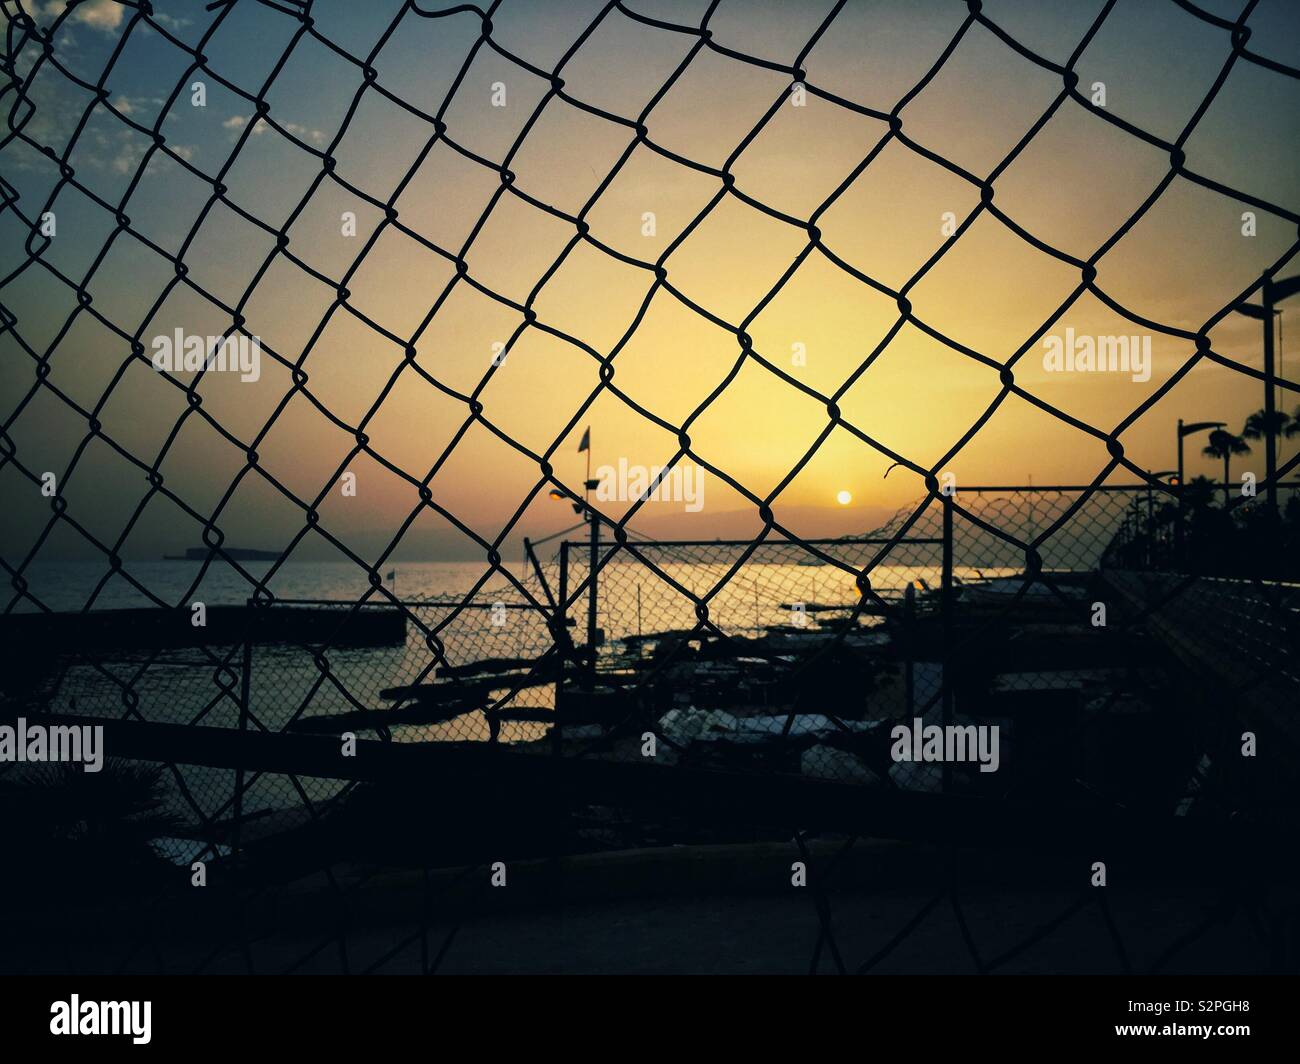 Chicken wire fence silhouette on the beach at sunrise Beirut Lebanon Middle East Stock Photo